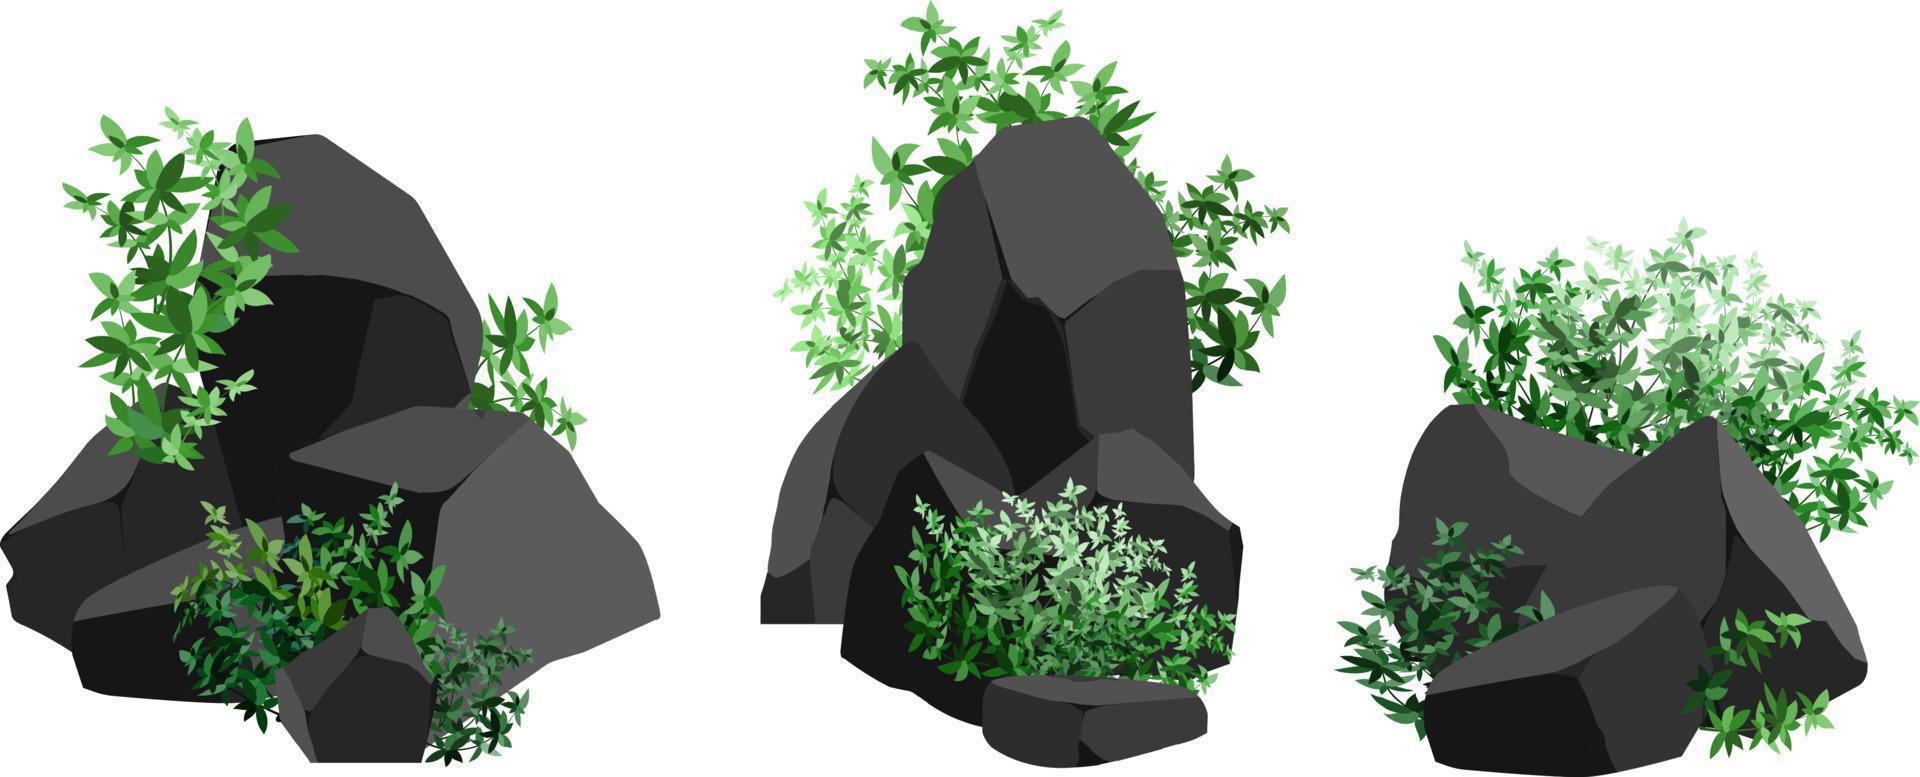 A set of black charcoal of various shapes and plants.Collection of pieces of coal, graphite, basalt and anthracite. The concept of mining and ore in a mine.Rock fragments,boulders. vector